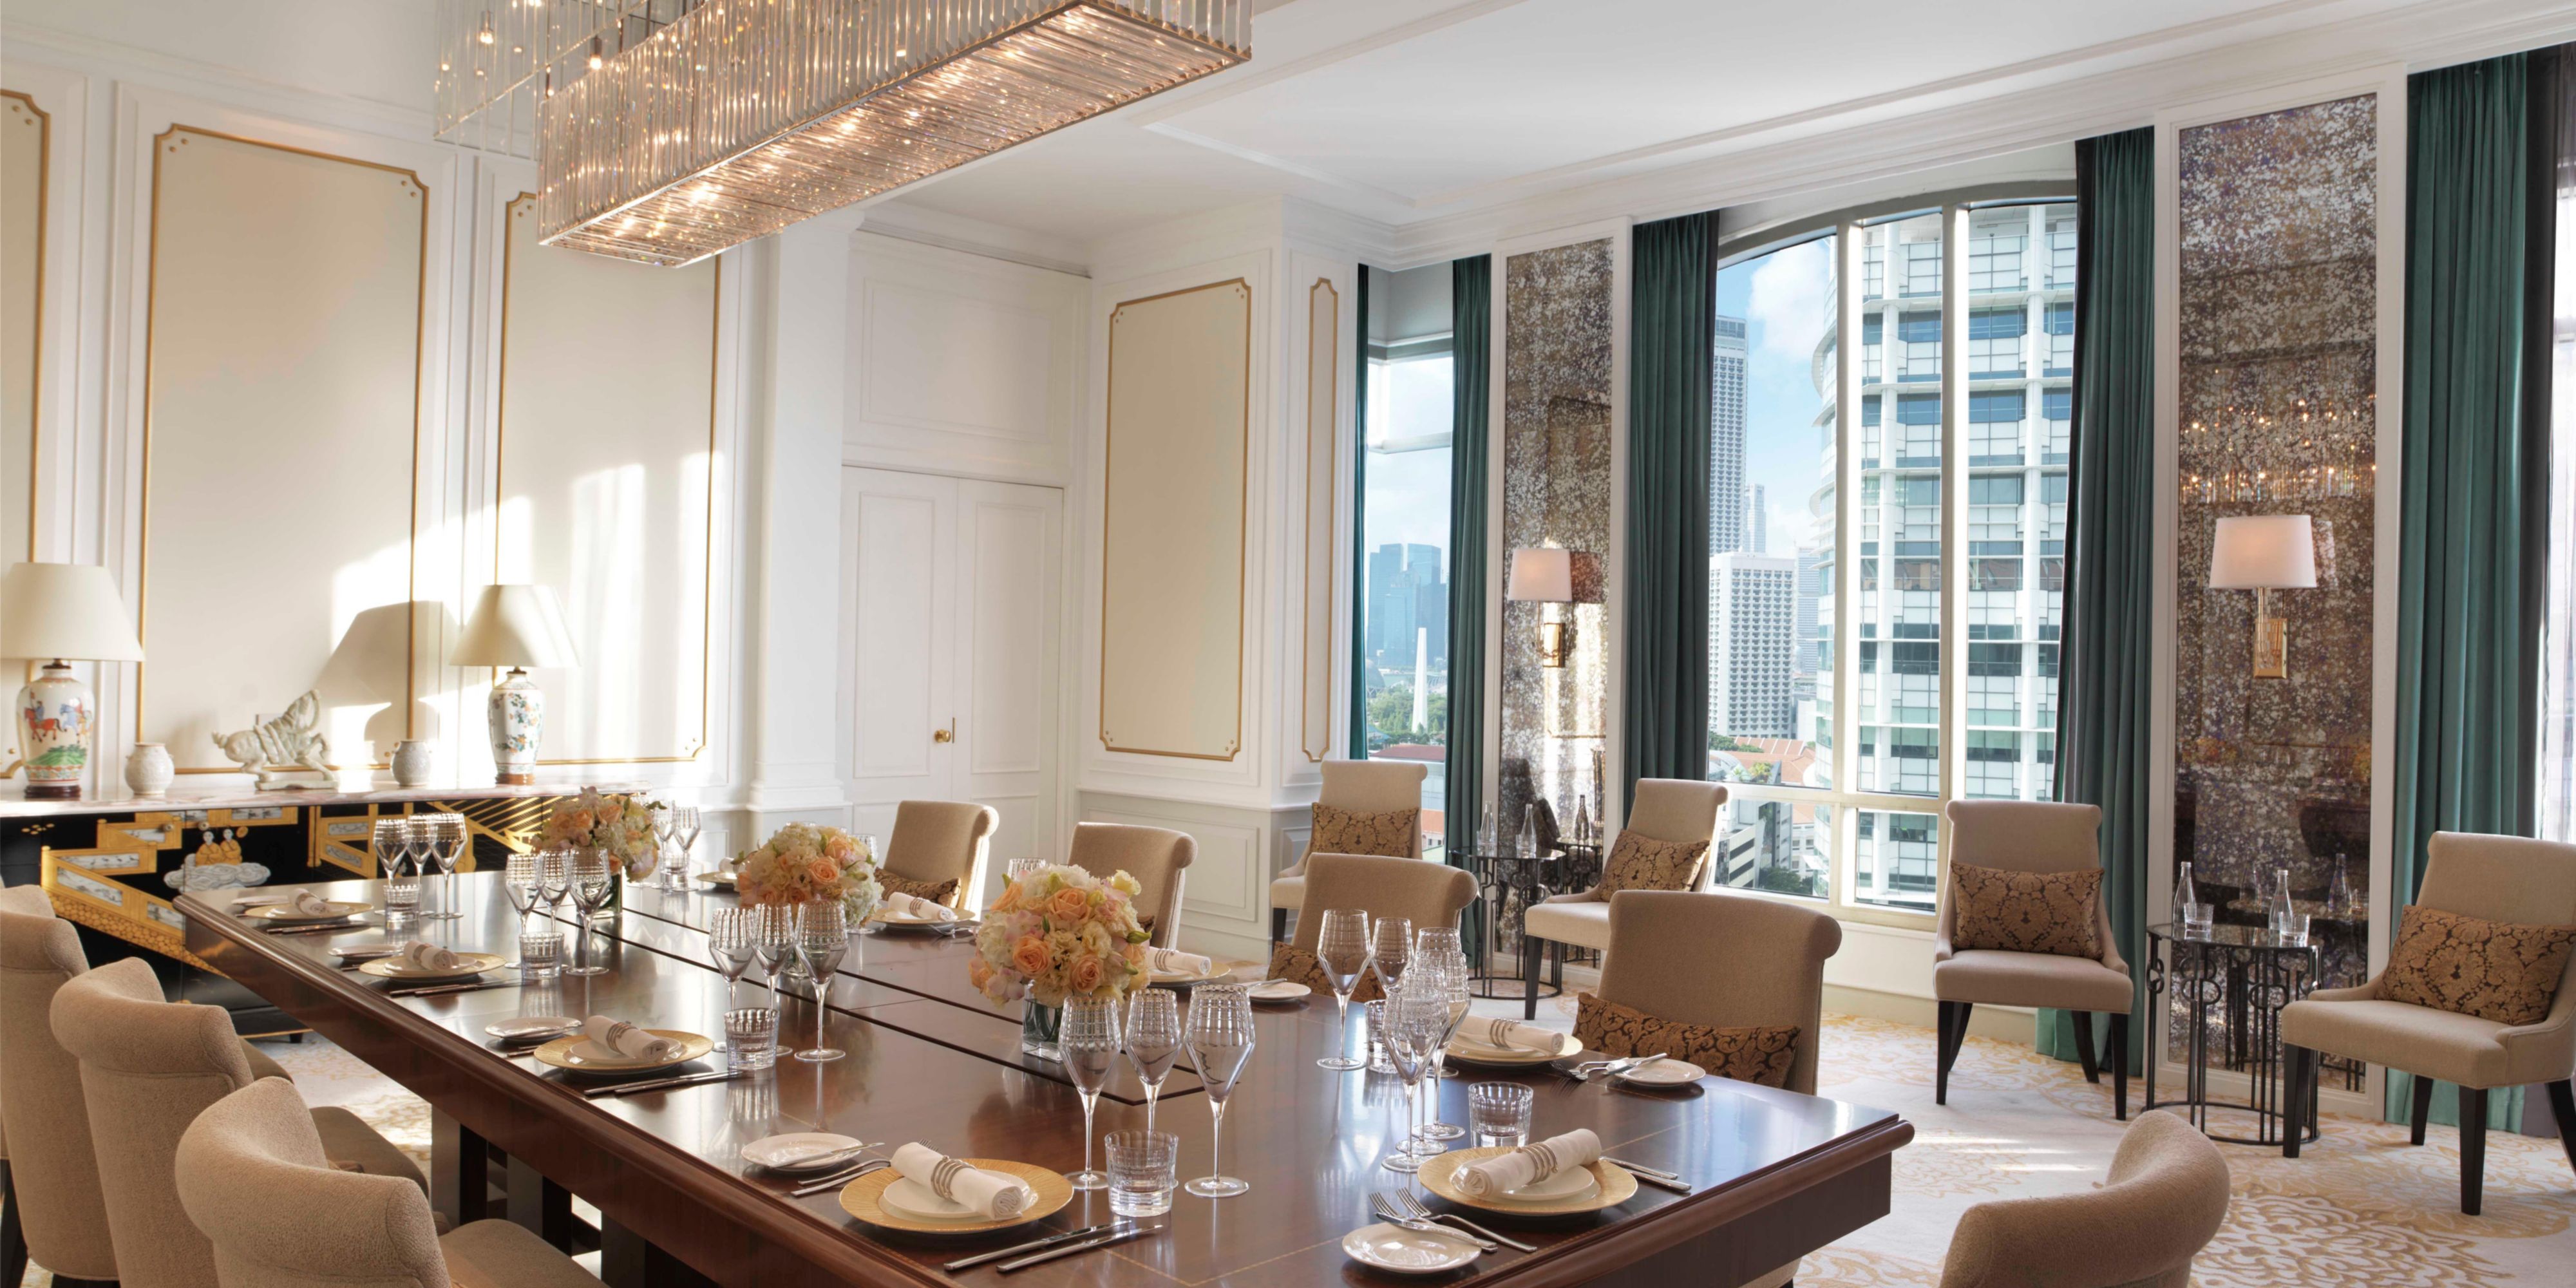 Delight in state-of-the-art facilities and elegantly appointed venues with natural daylight at InterContinental Singapore, one of Asia's top choices for meeting planners. Select from over 1,000sqm of flexible meeting space from the pillarless Grand Ballroom to the exclusive Presidential Suite,